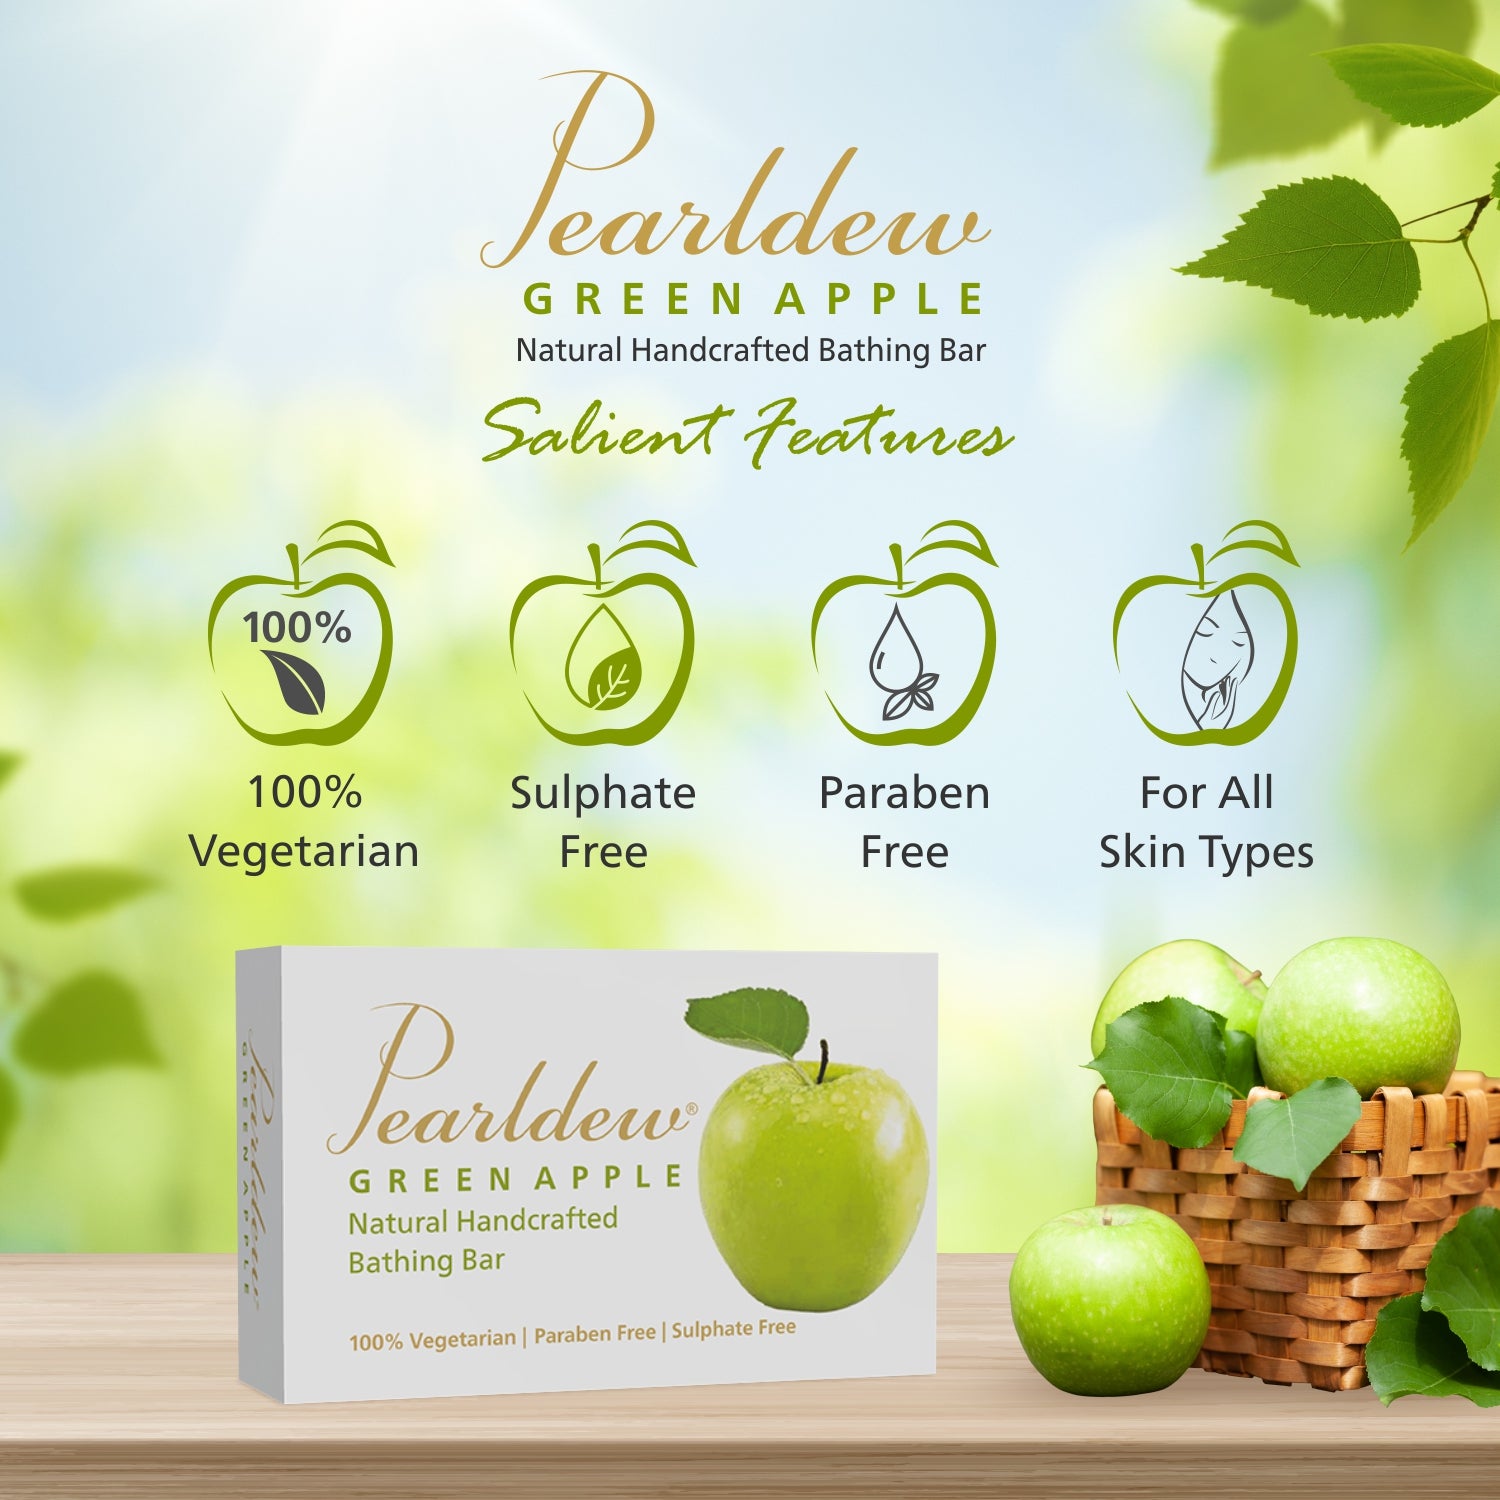 Pearldew Green Apple Natural Handcrafted Bathing Bar (75 gm)